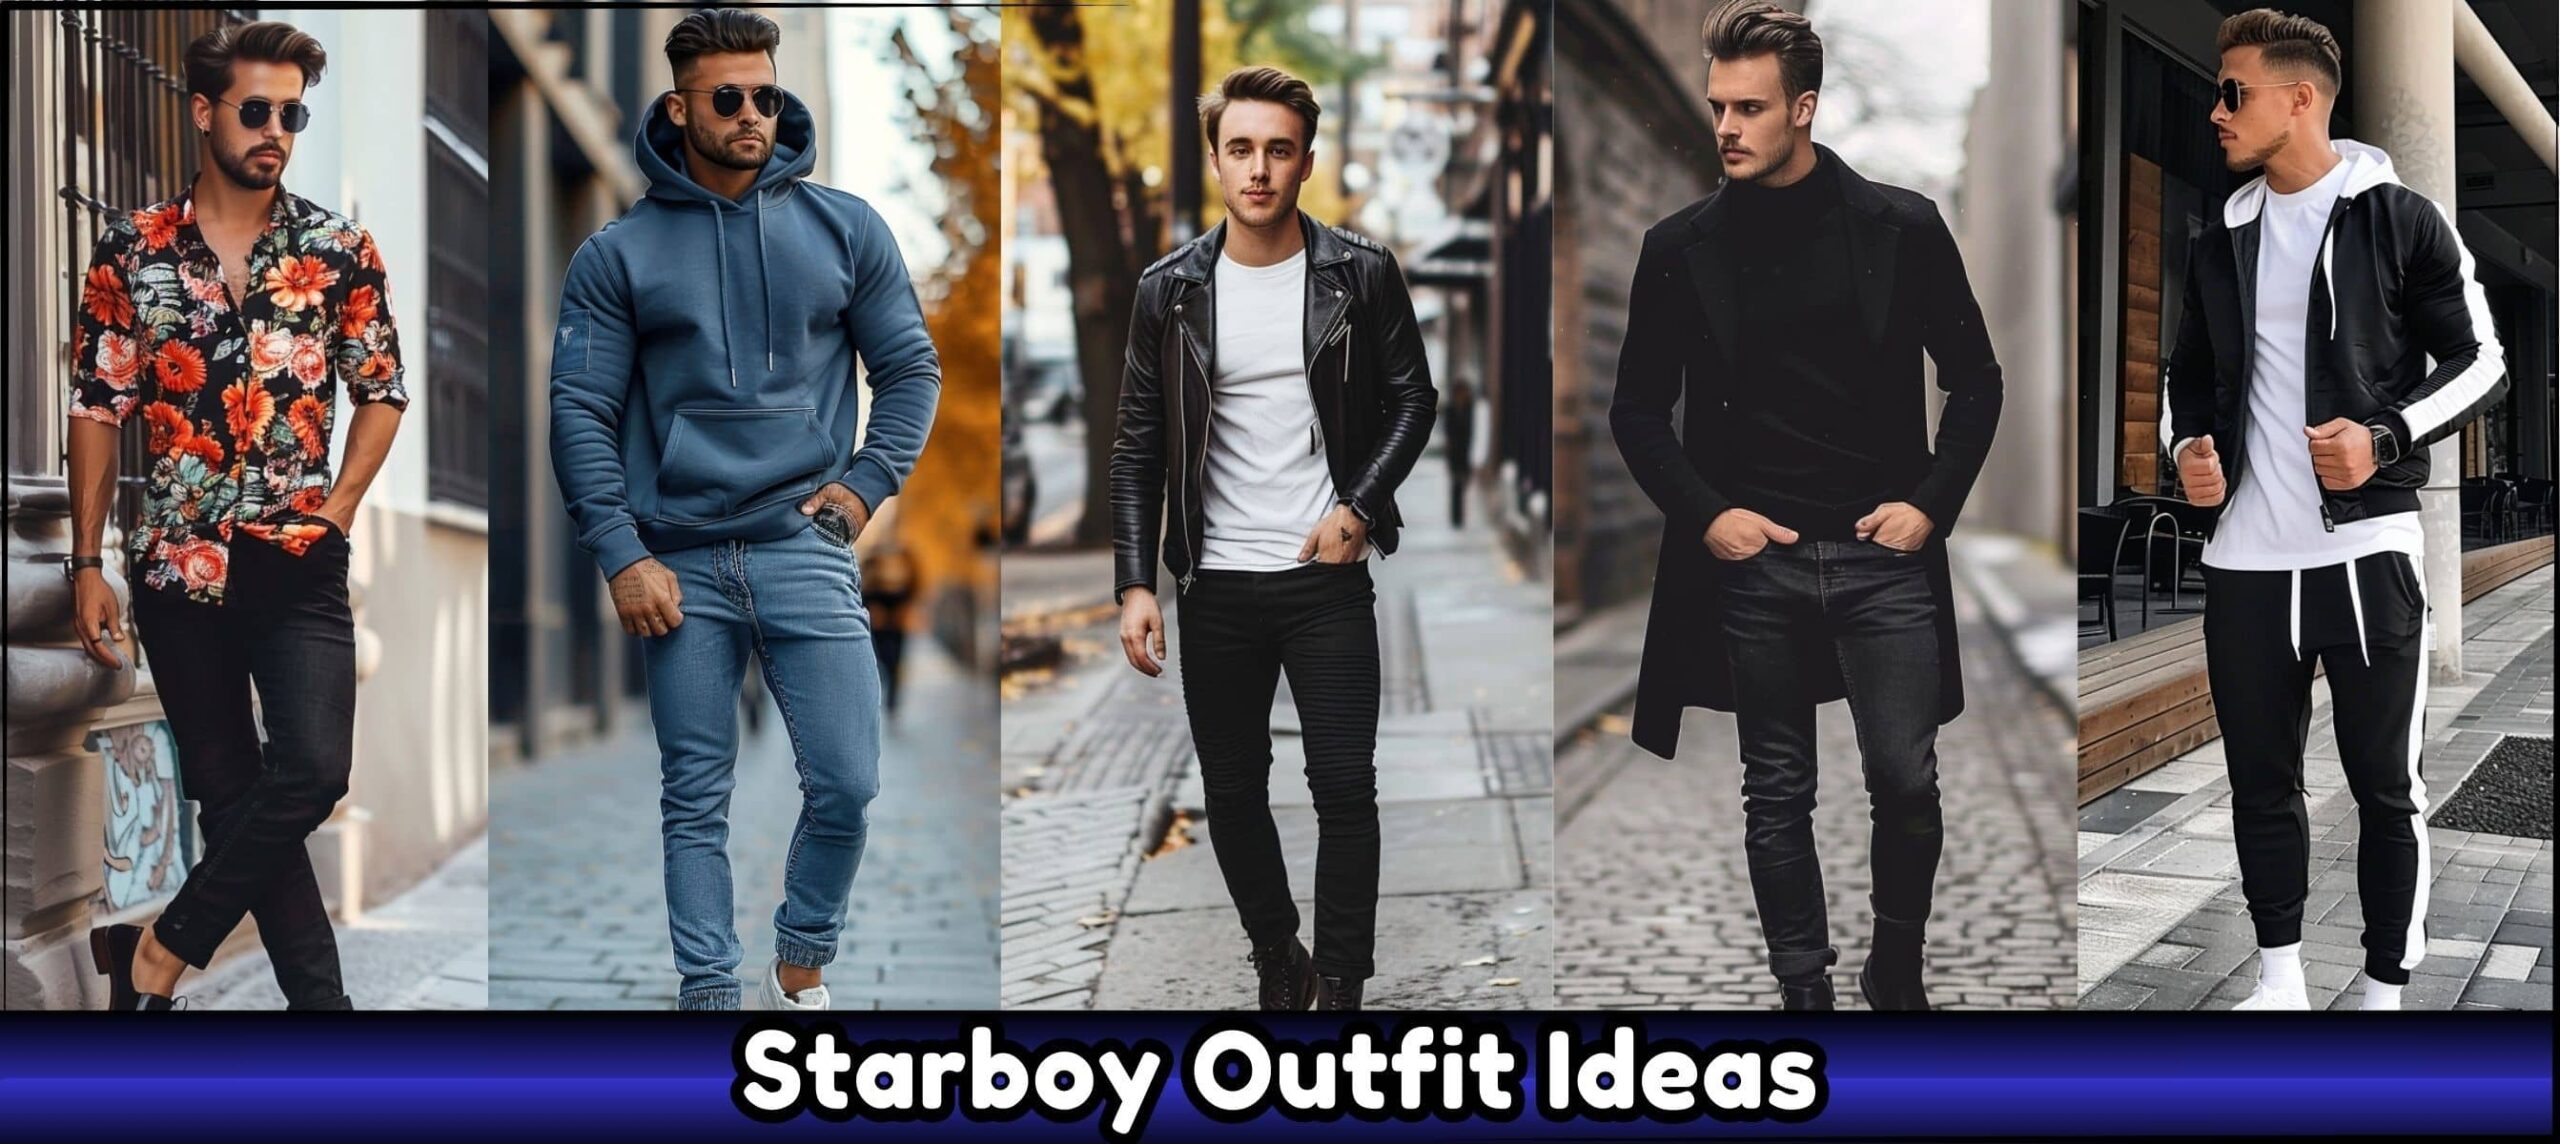 Starboy Outfit Ideas